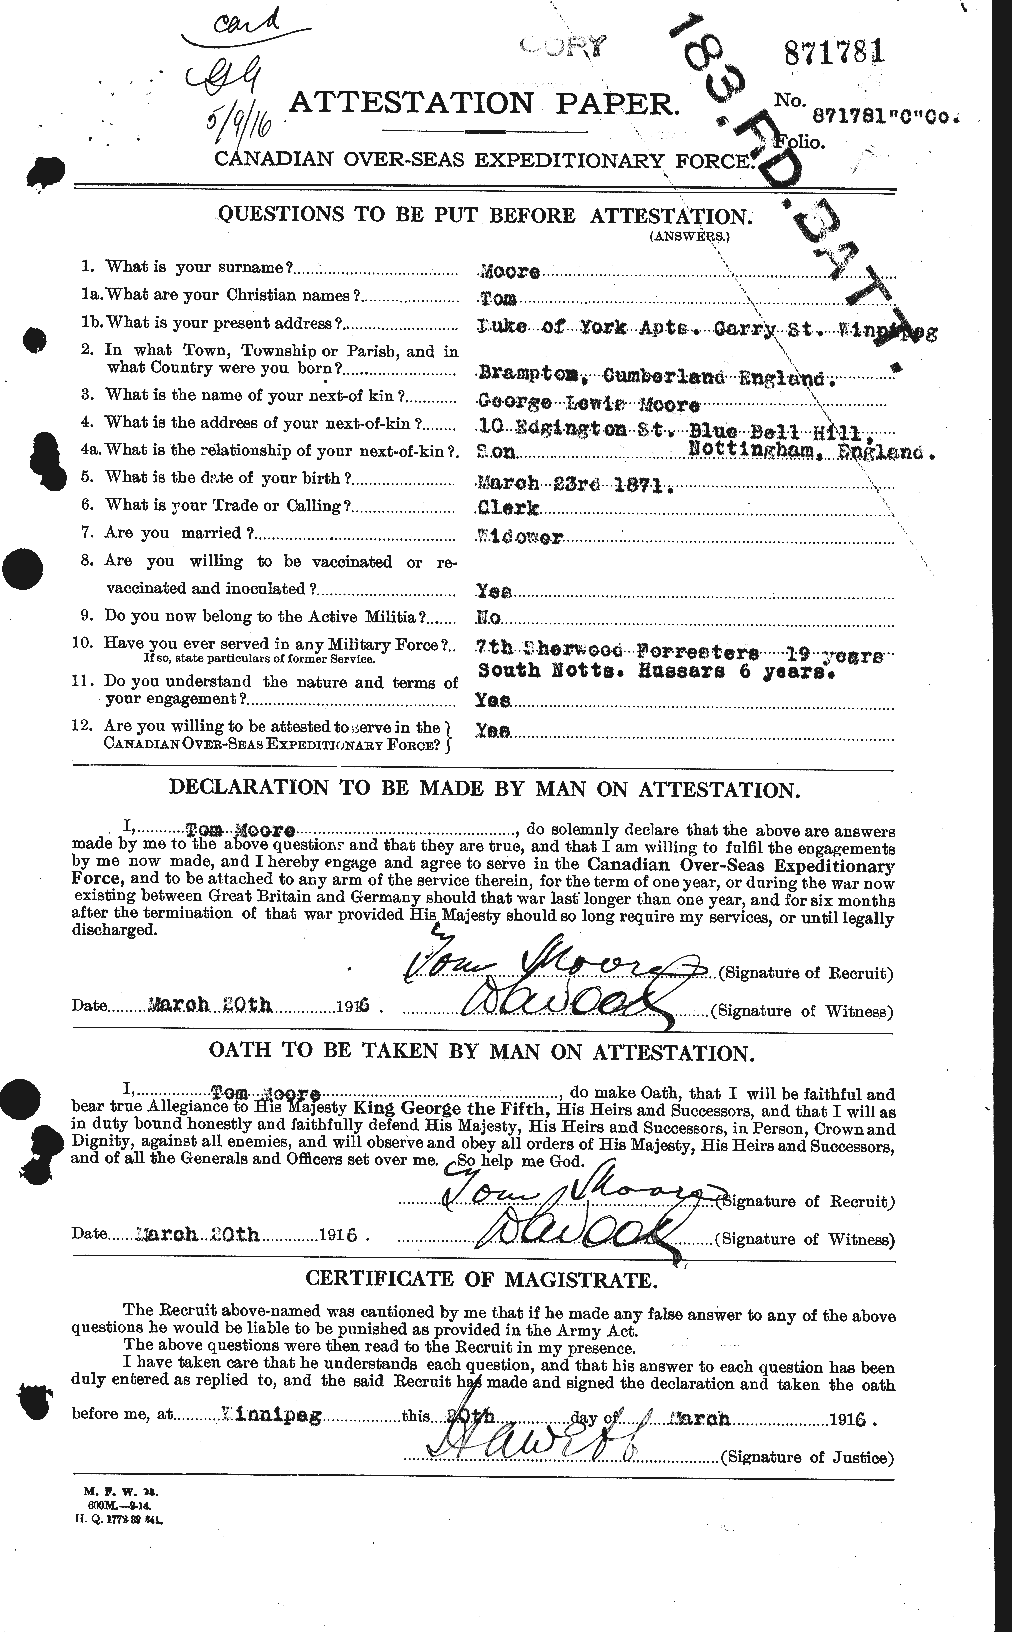 Personnel Records of the First World War - CEF 505679a